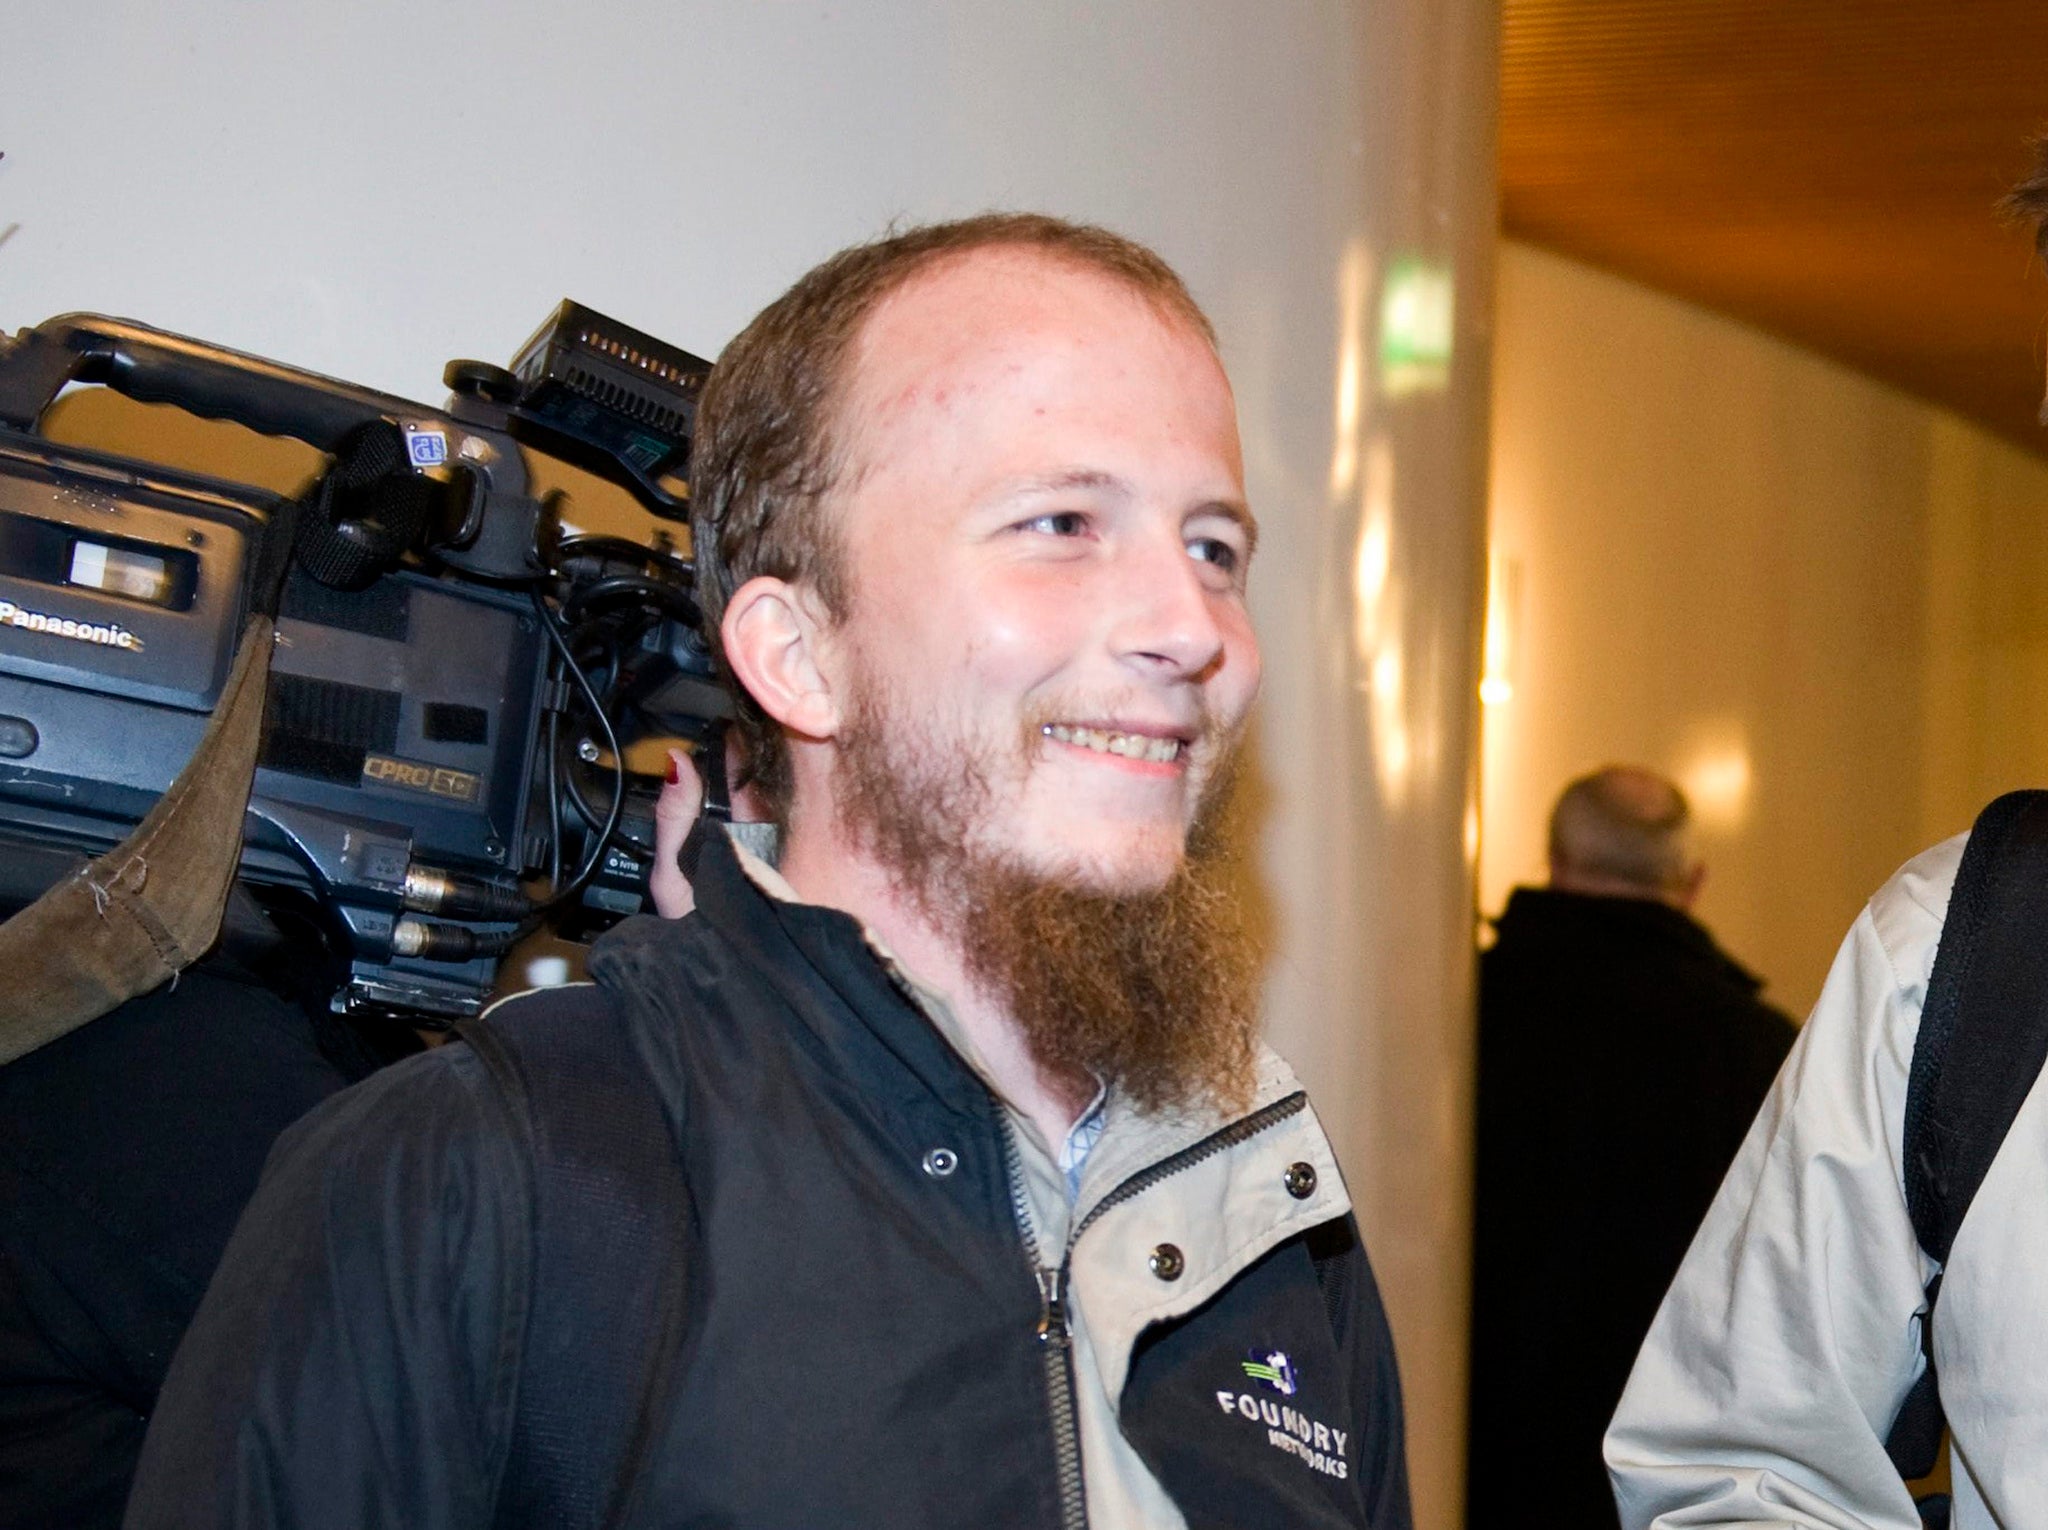 Gottfrid Svartholm Warg, the co-founder of Pirate bay, is pictured in Stockholm, February 16, 2009. Warg, a 27-year-old Swede and co-owner of the world's biggest free file-sharing websites, arrived in Sweden under escort on September 11, 2012 to begin a o